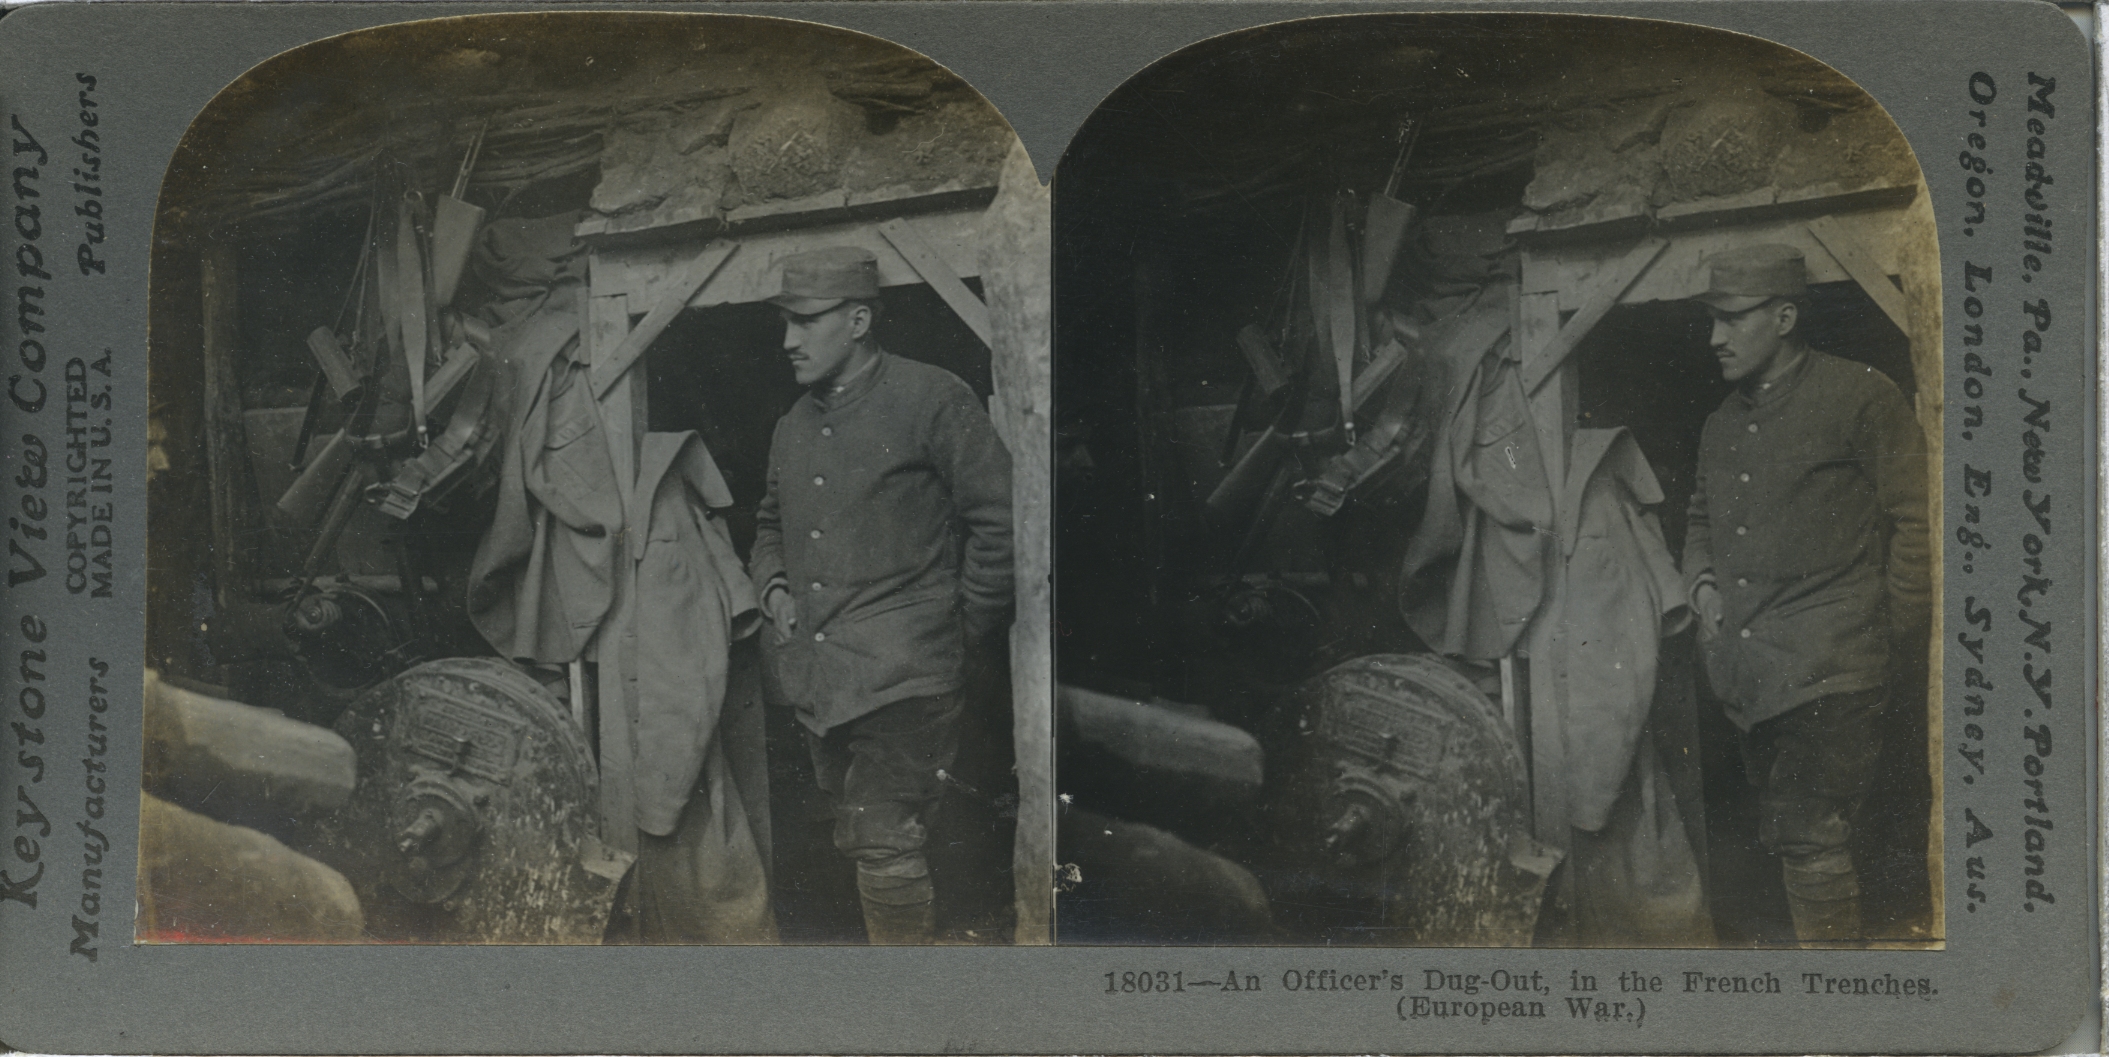 An Officer's Dugout in the French Trenches (Eur. War)